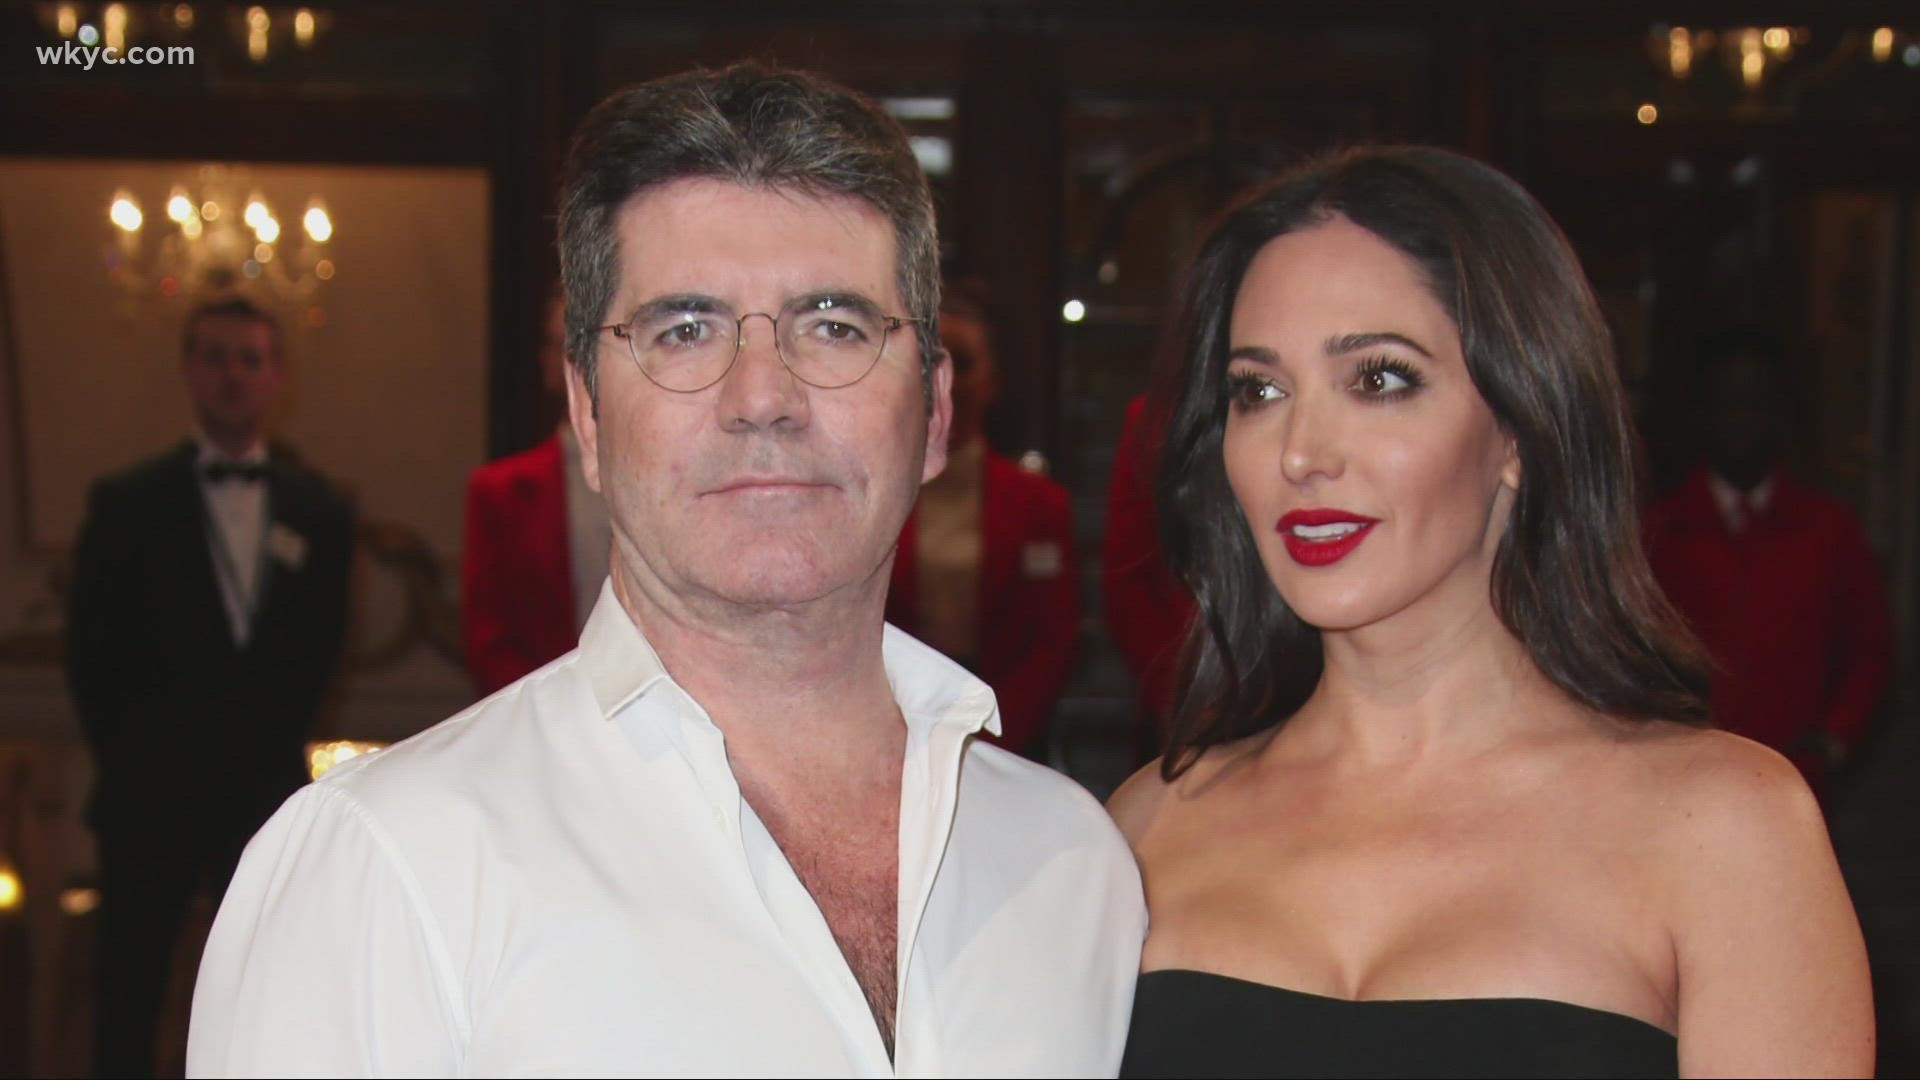 Congratulations are in order for Simon Cowell and long-time girlfriend Lauren Silverman.